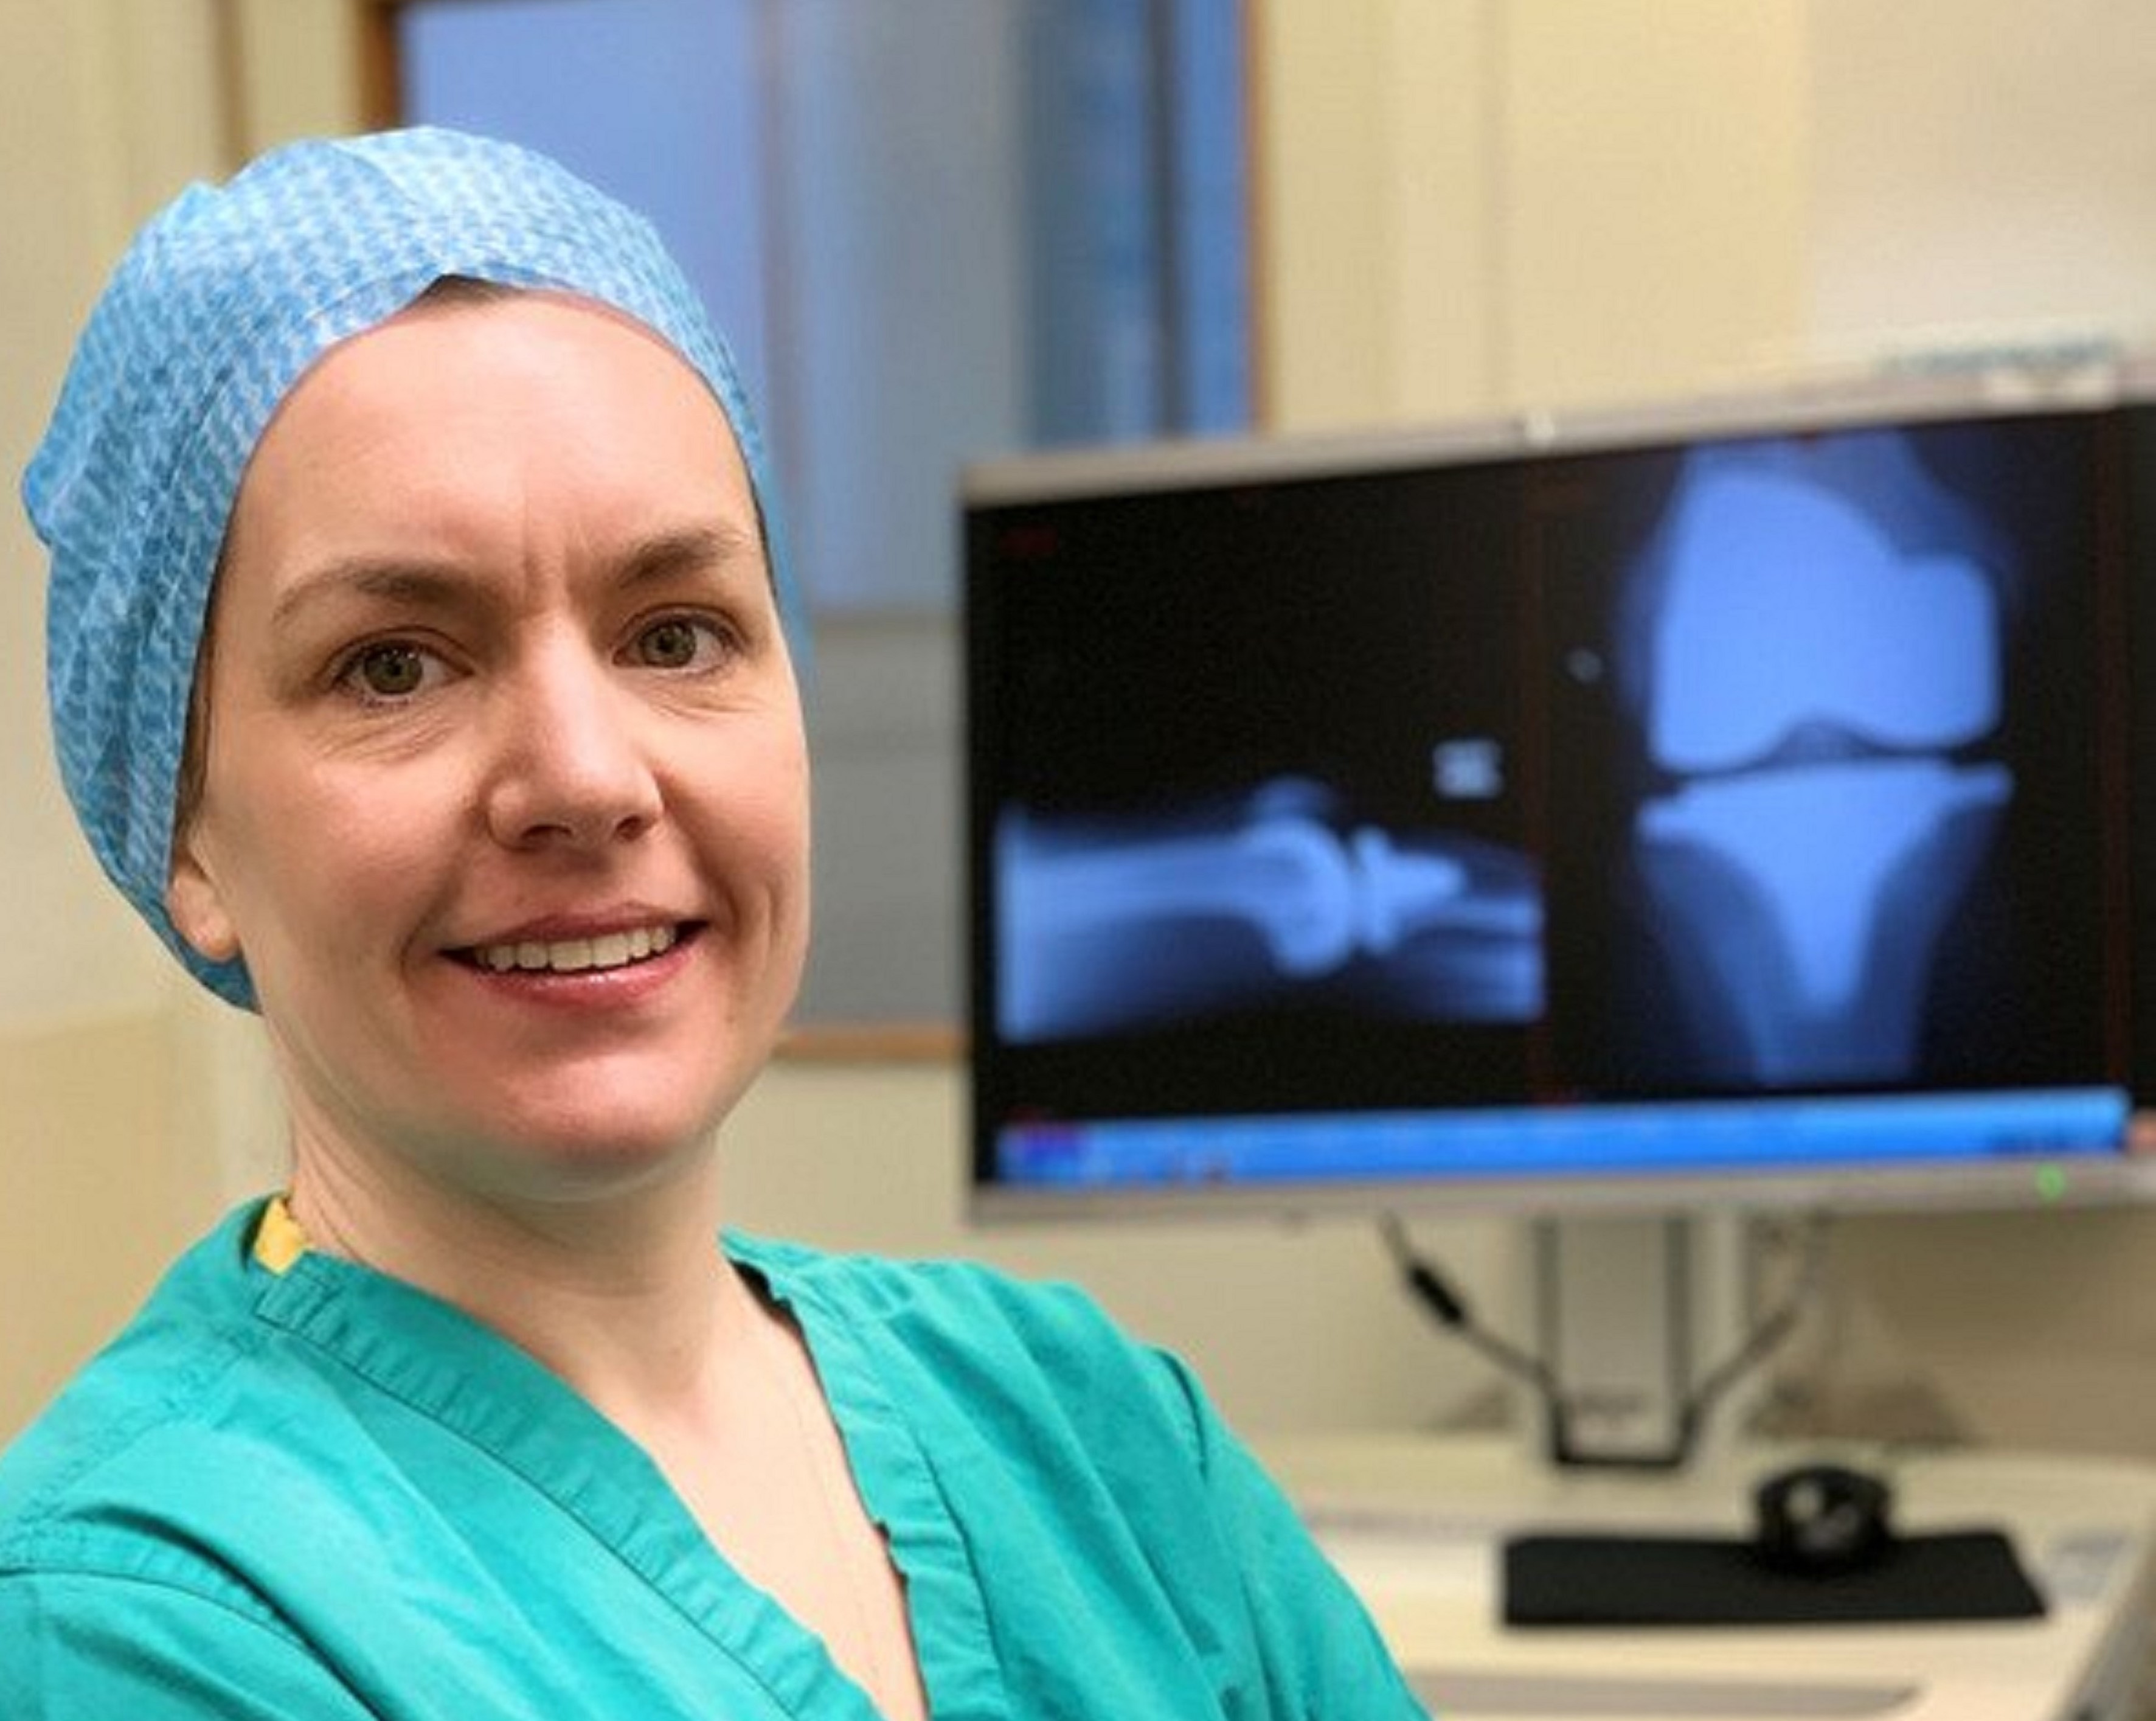 Consultant Orthopaedic Surgeon Sarah Mitchell, carried out the procedure.